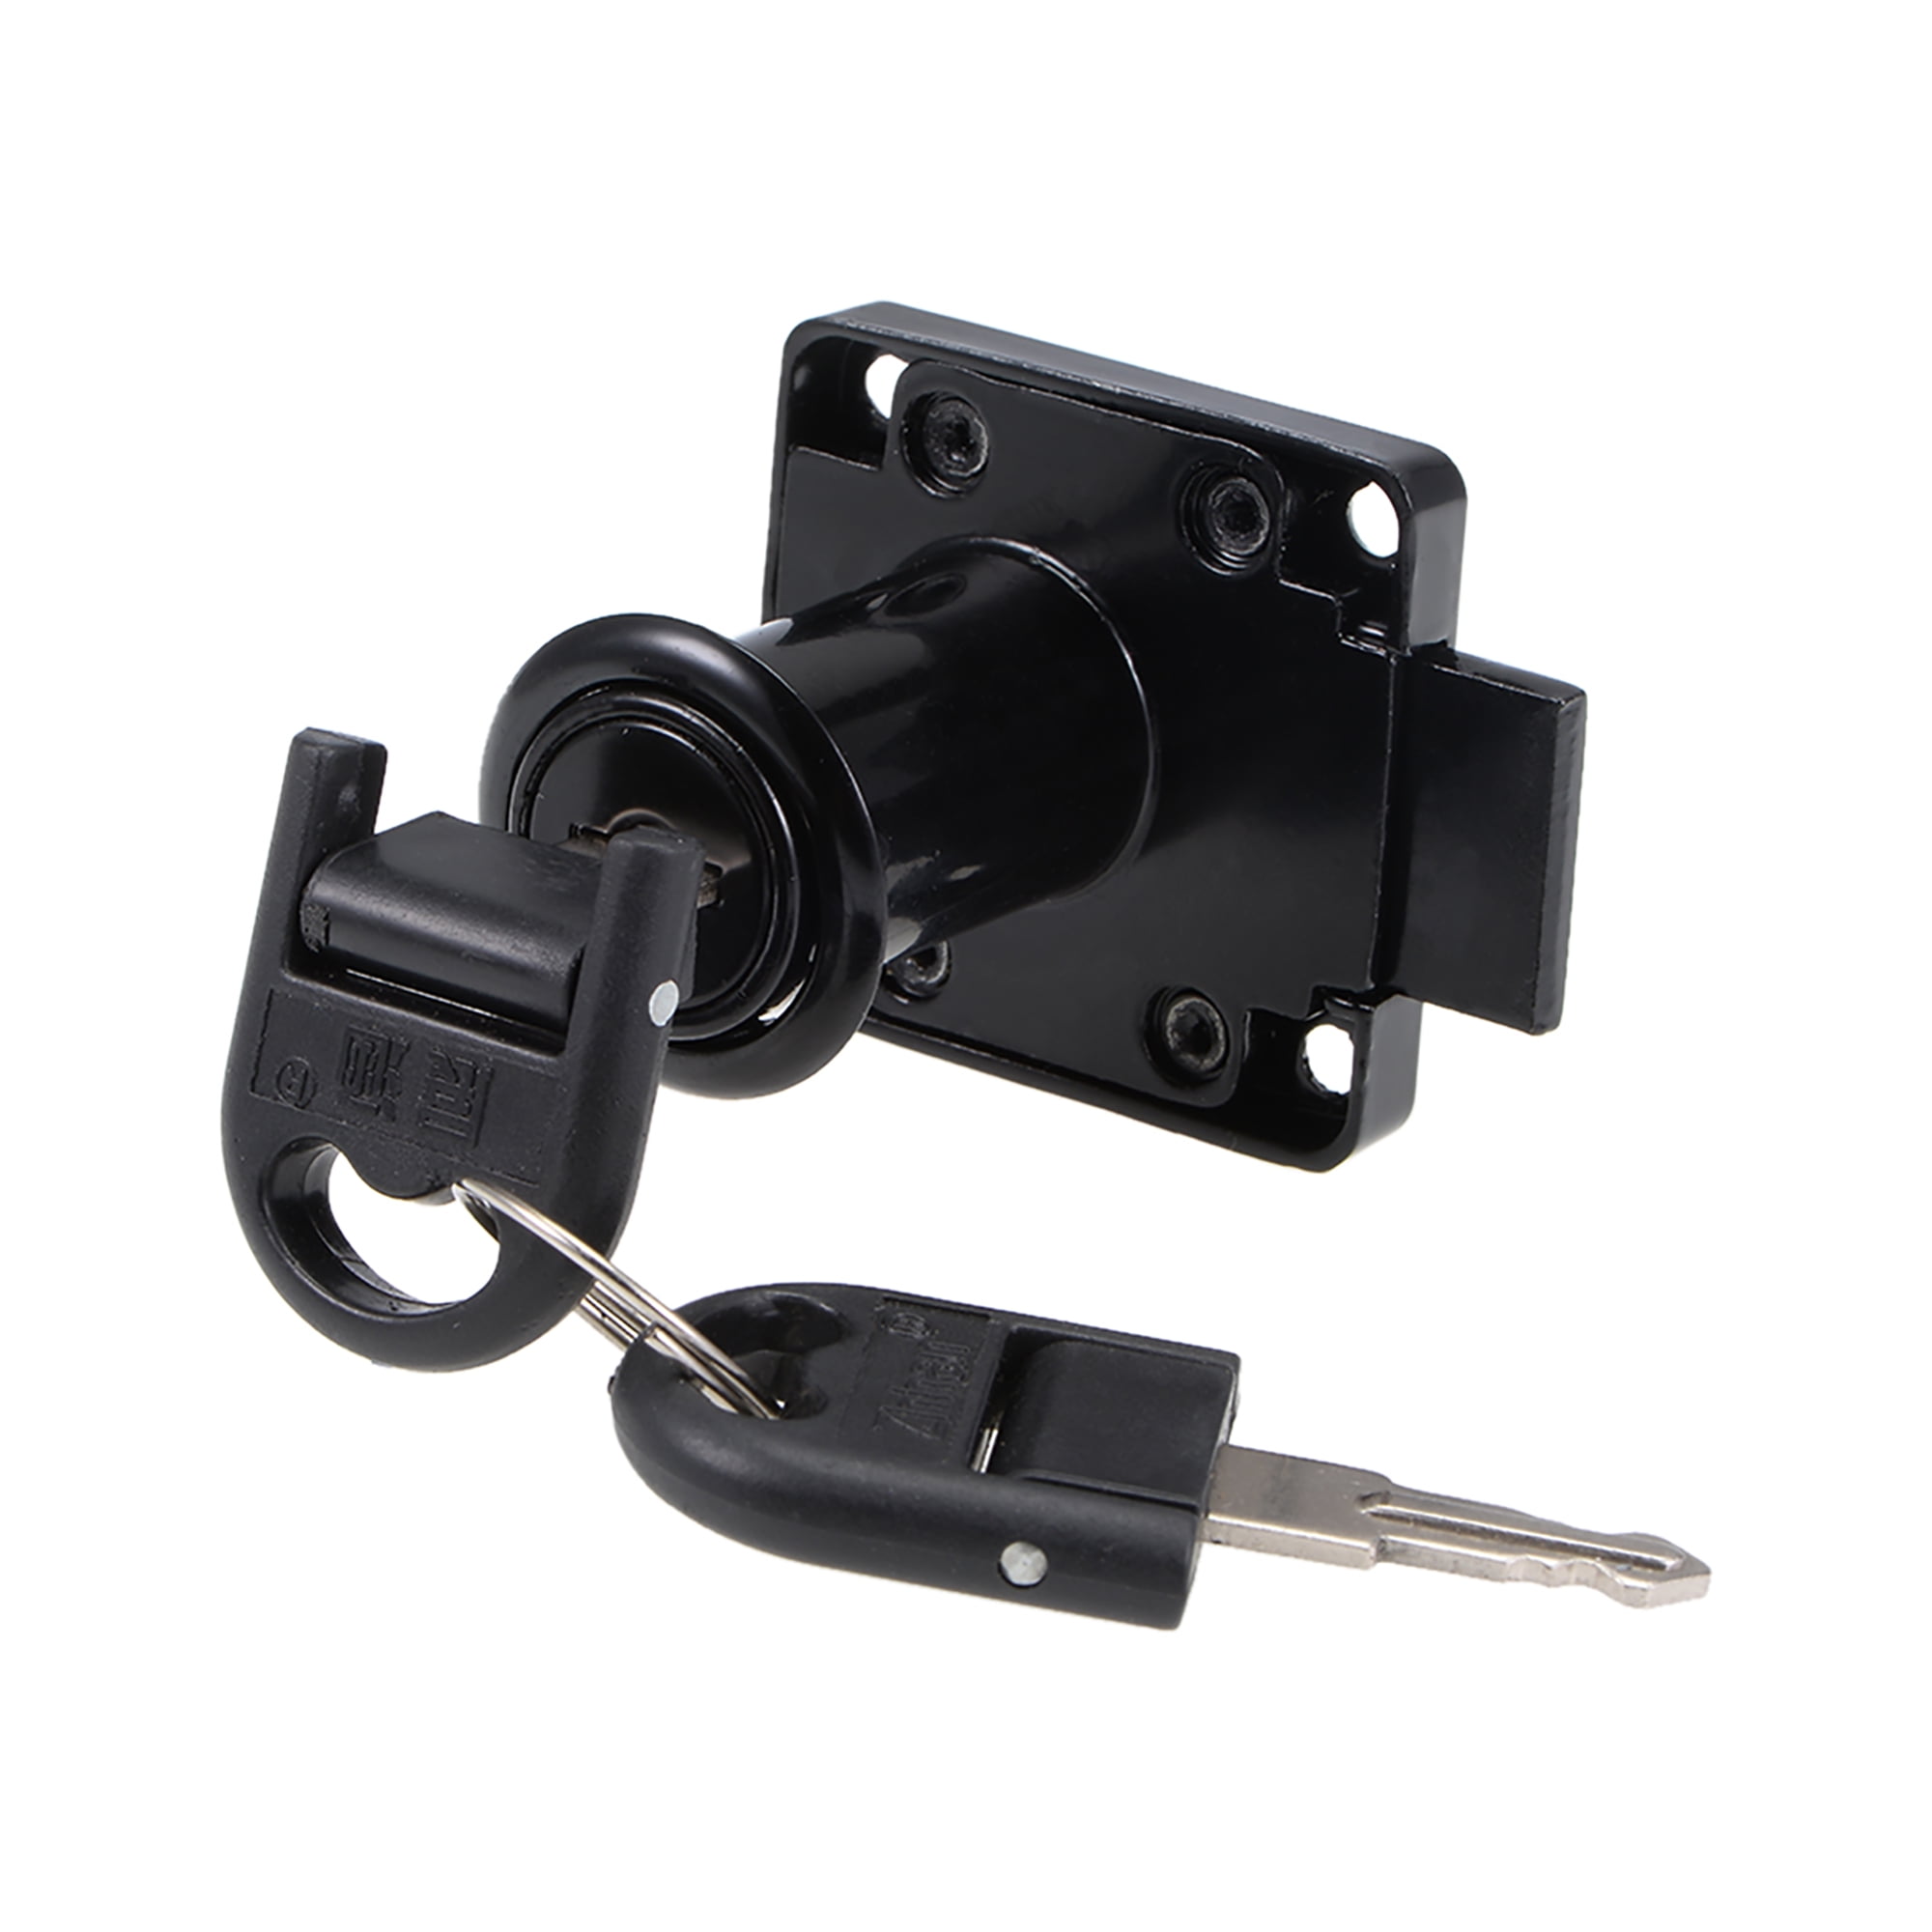 1Pcs 12mm Metal Mini 905 Simple Mechanical Lock For Chassis Drawer High Quantity 